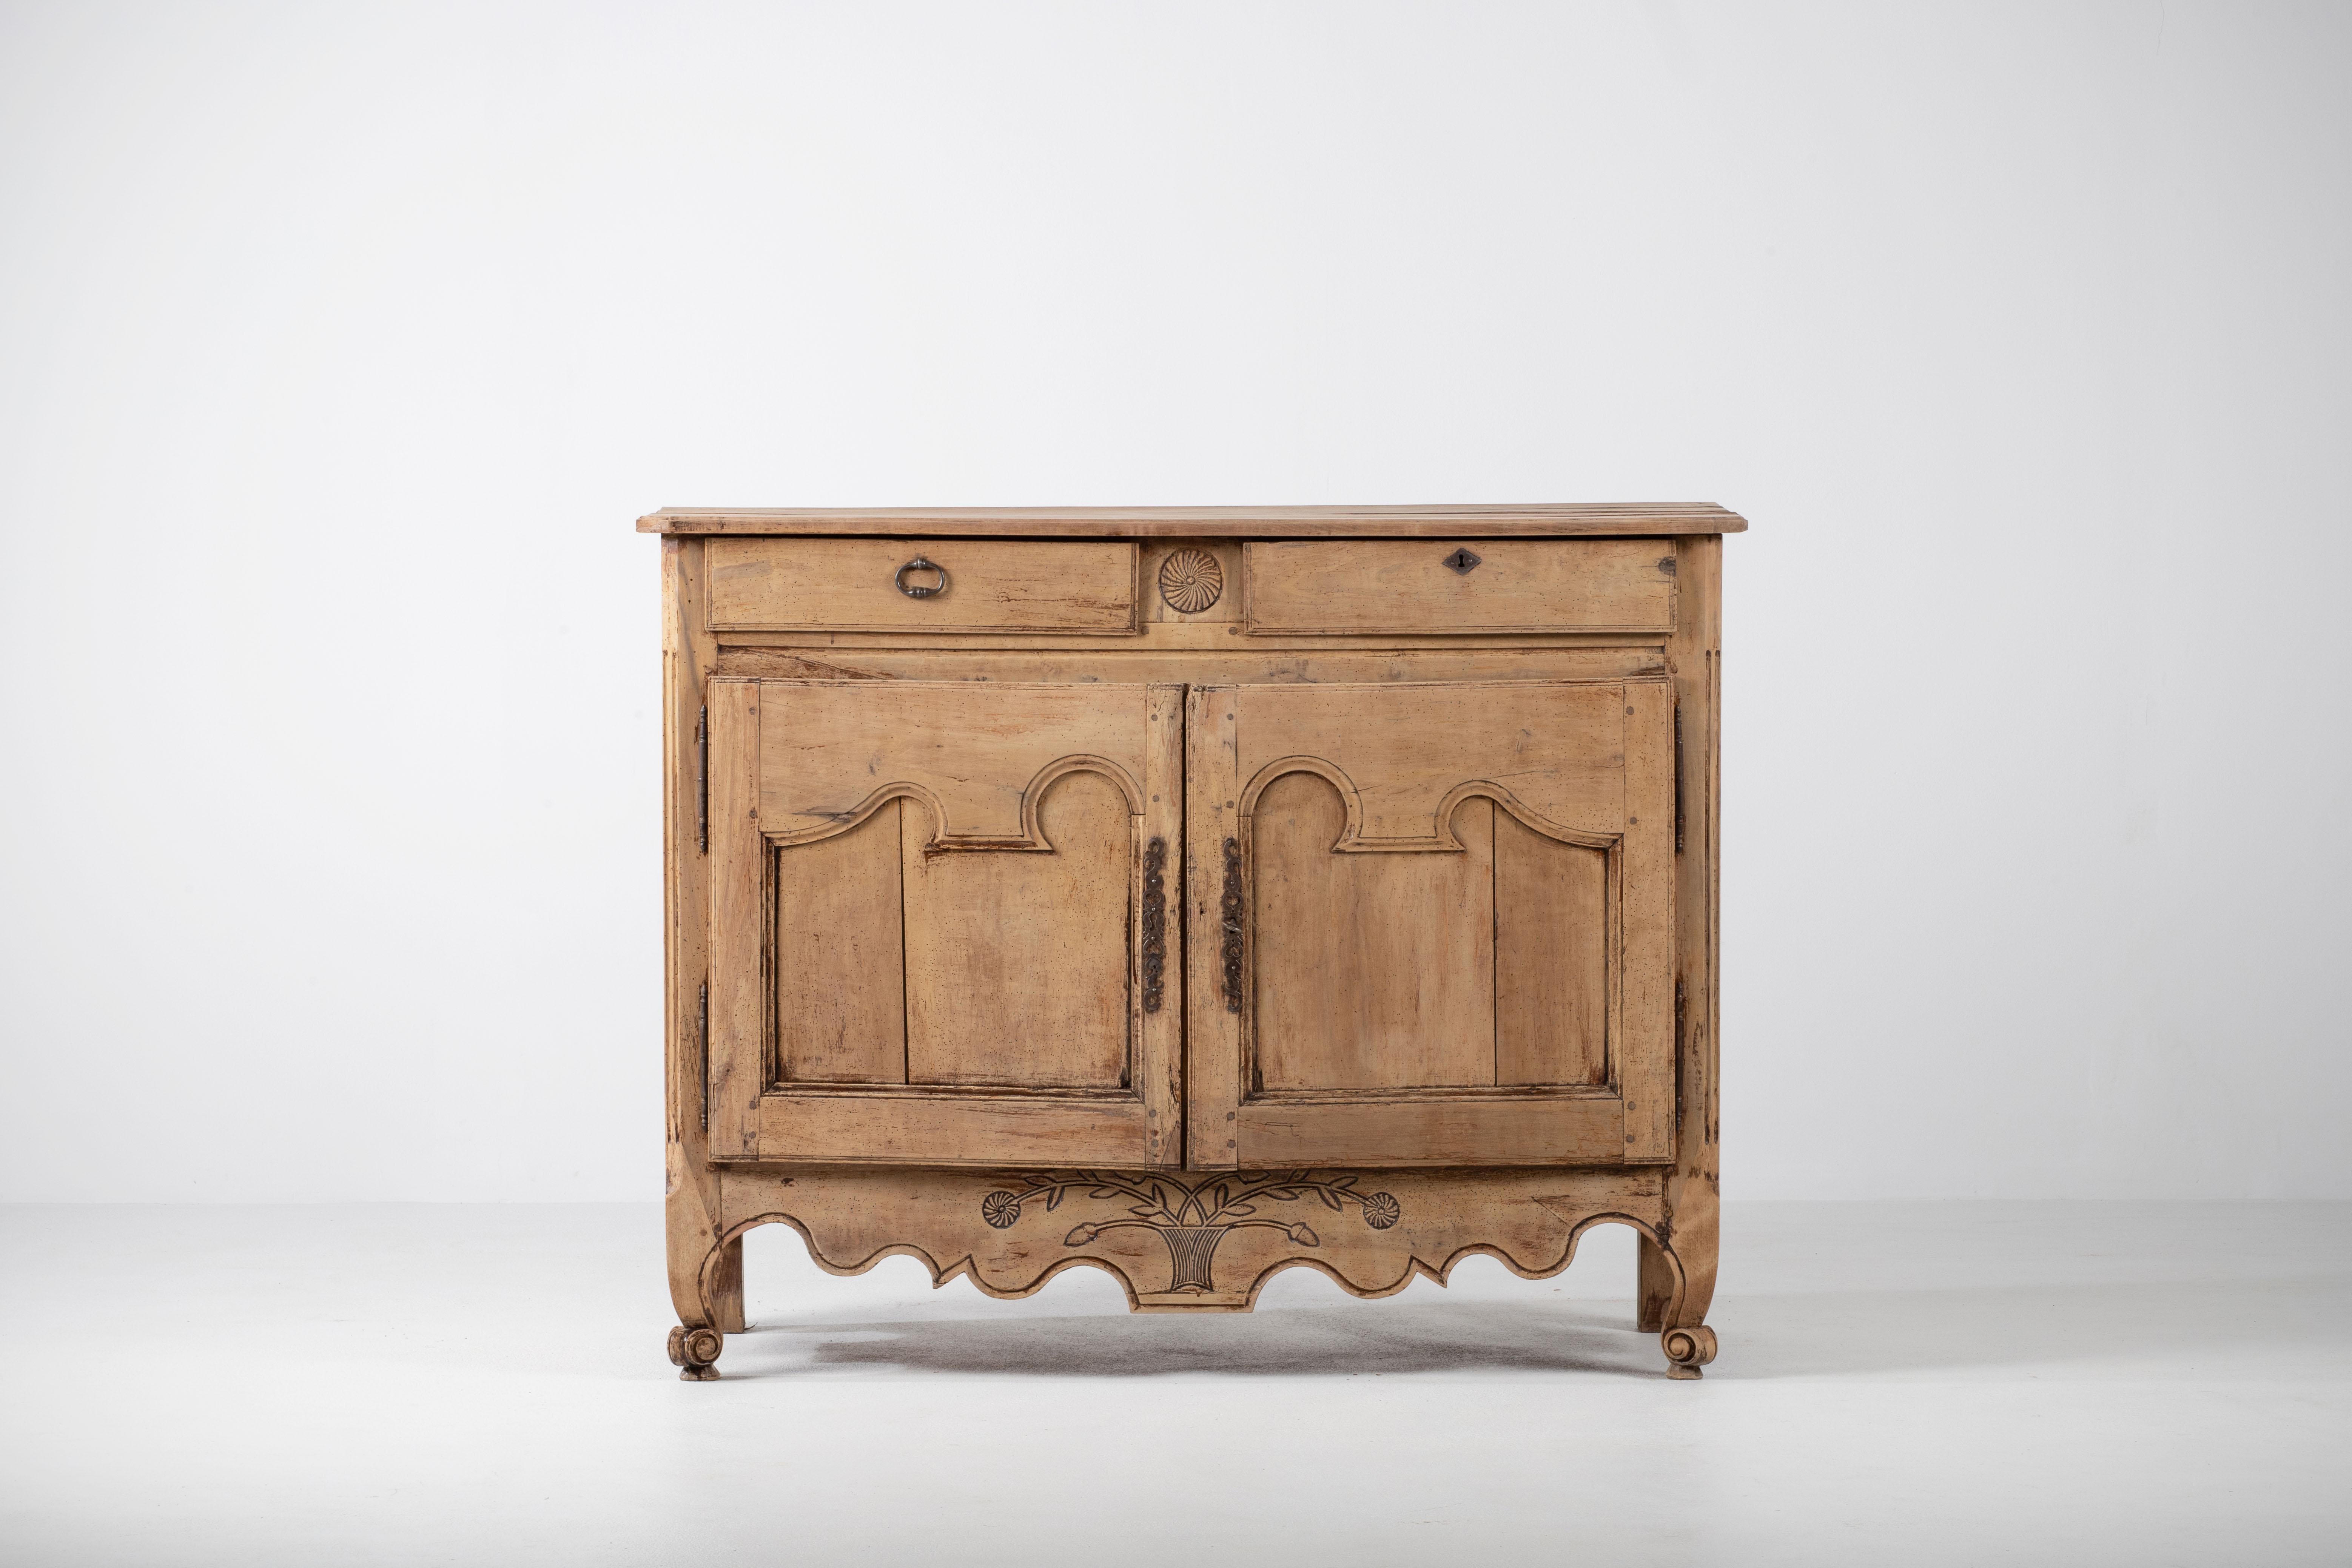 A two door and drawer provencal cabinet from France, circa 1890. Representing the casual yet refined aesthetic of the French countryside, patinated, enhancing the natural textured figure of the wood and subtle carved ornament. 
A testament to the